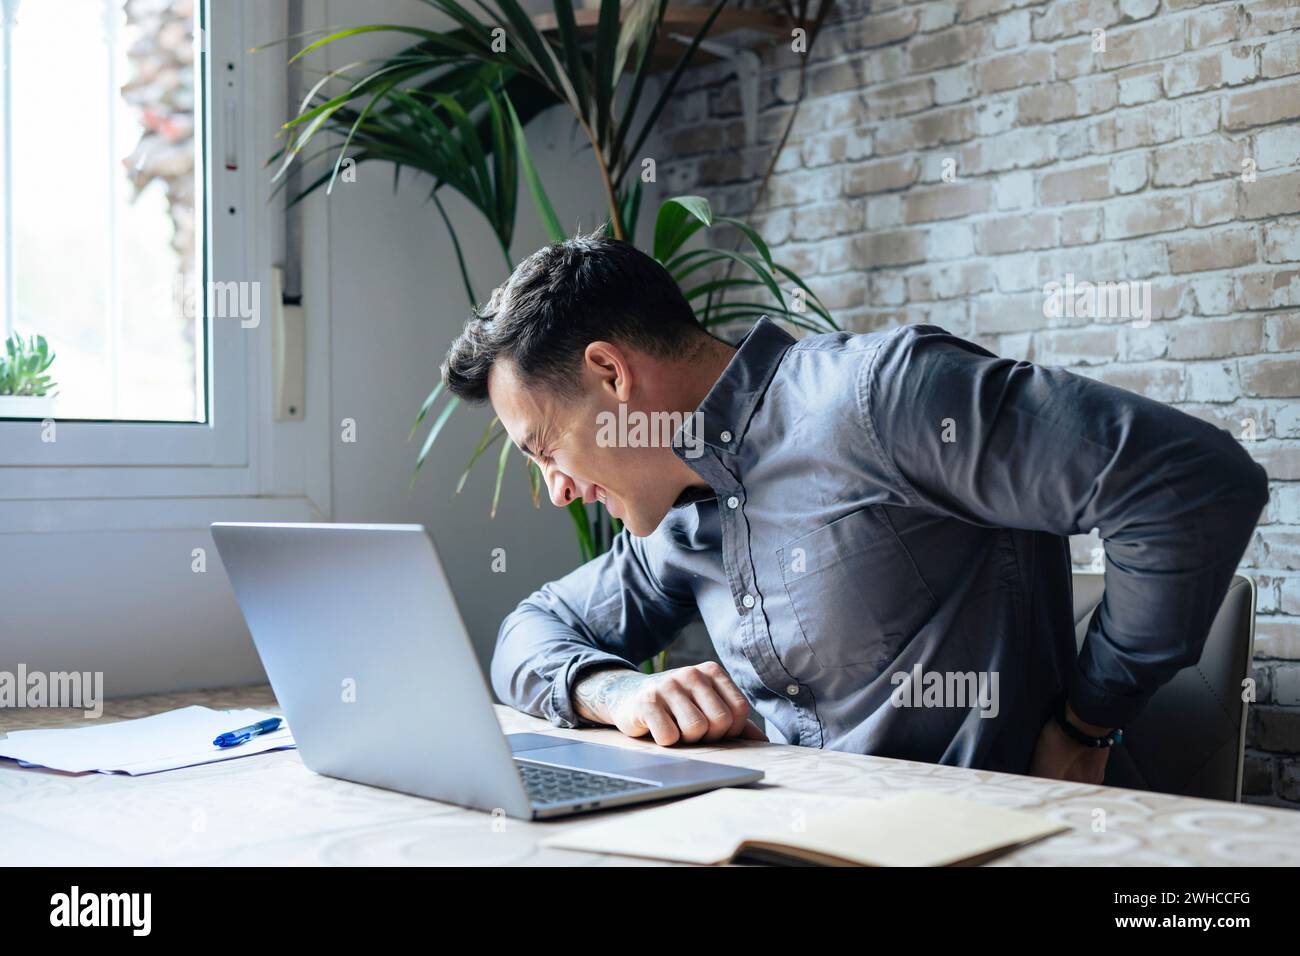 Unhappy Caucasian man sit at desk in home office work on laptop suffer from lower back muscle strain or spasm. Unwell unhealthy male have backache from incorrect posture. Sedentary life concept. Stock Photo